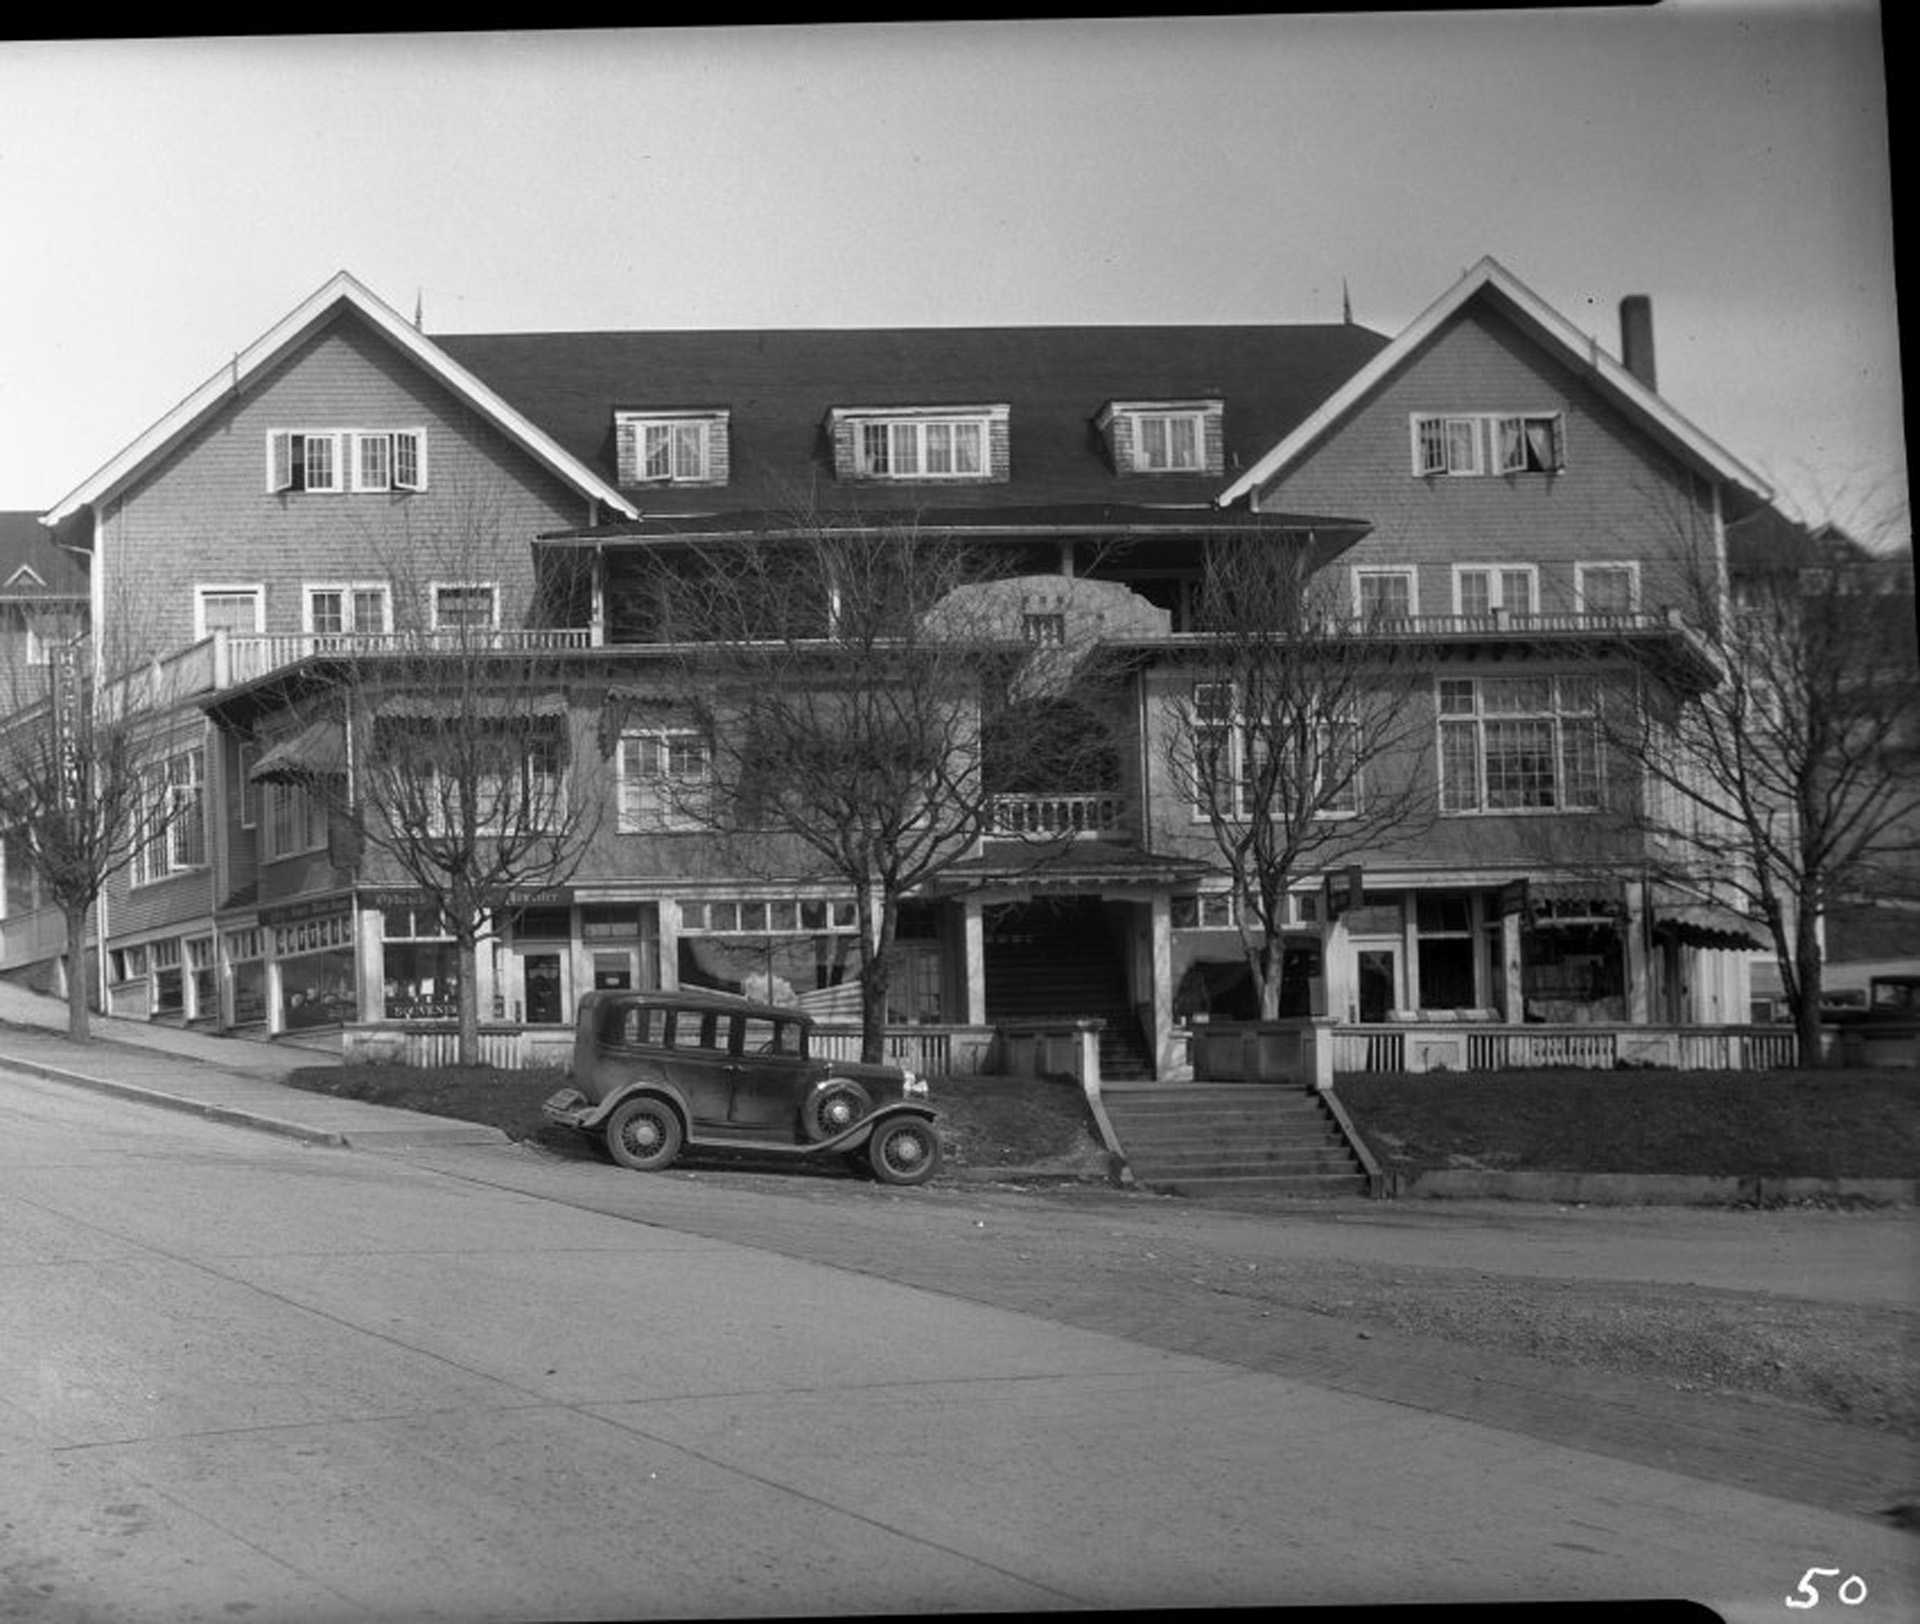 Rodmay Hotel. 1930. Car is either a 1930 Chevrolet, or a 1930 Pontiac.